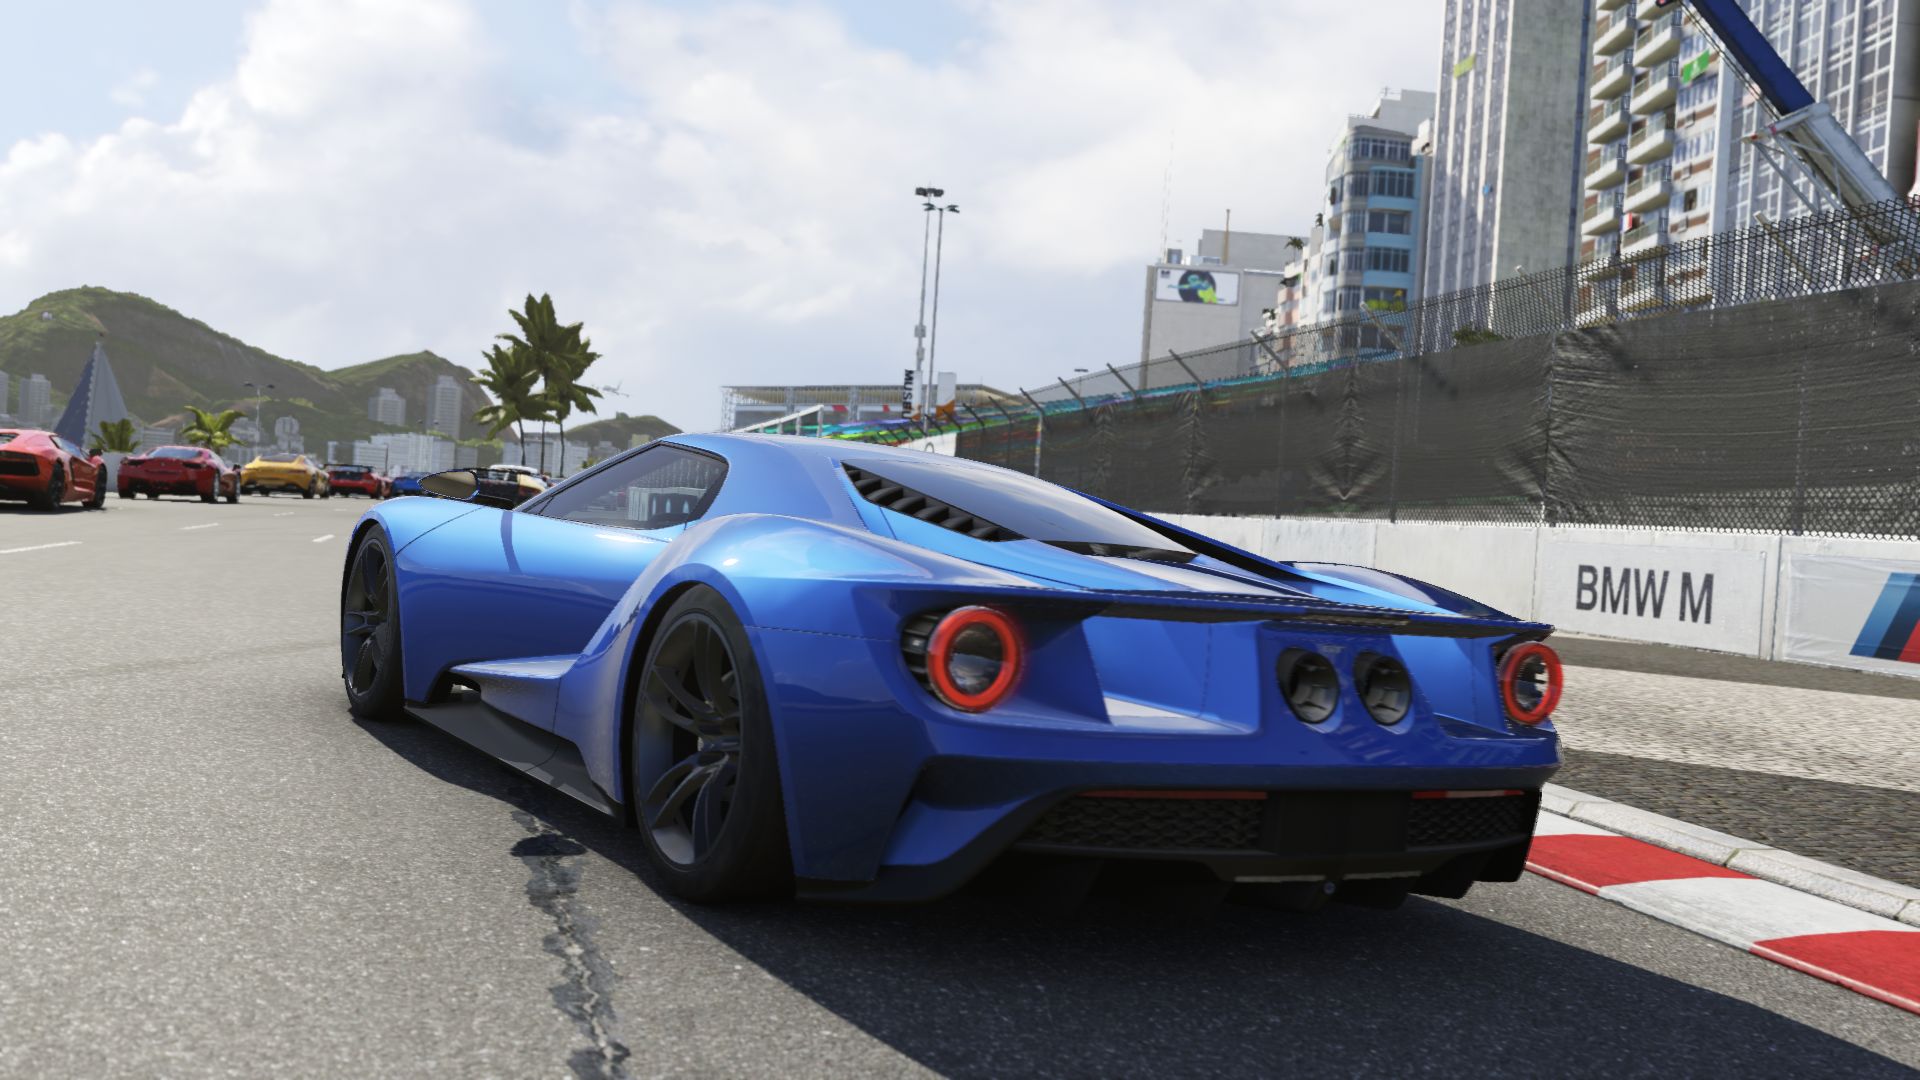 Download mobile wallpaper Forza Motorsport 6, Video Game, Forza for free.